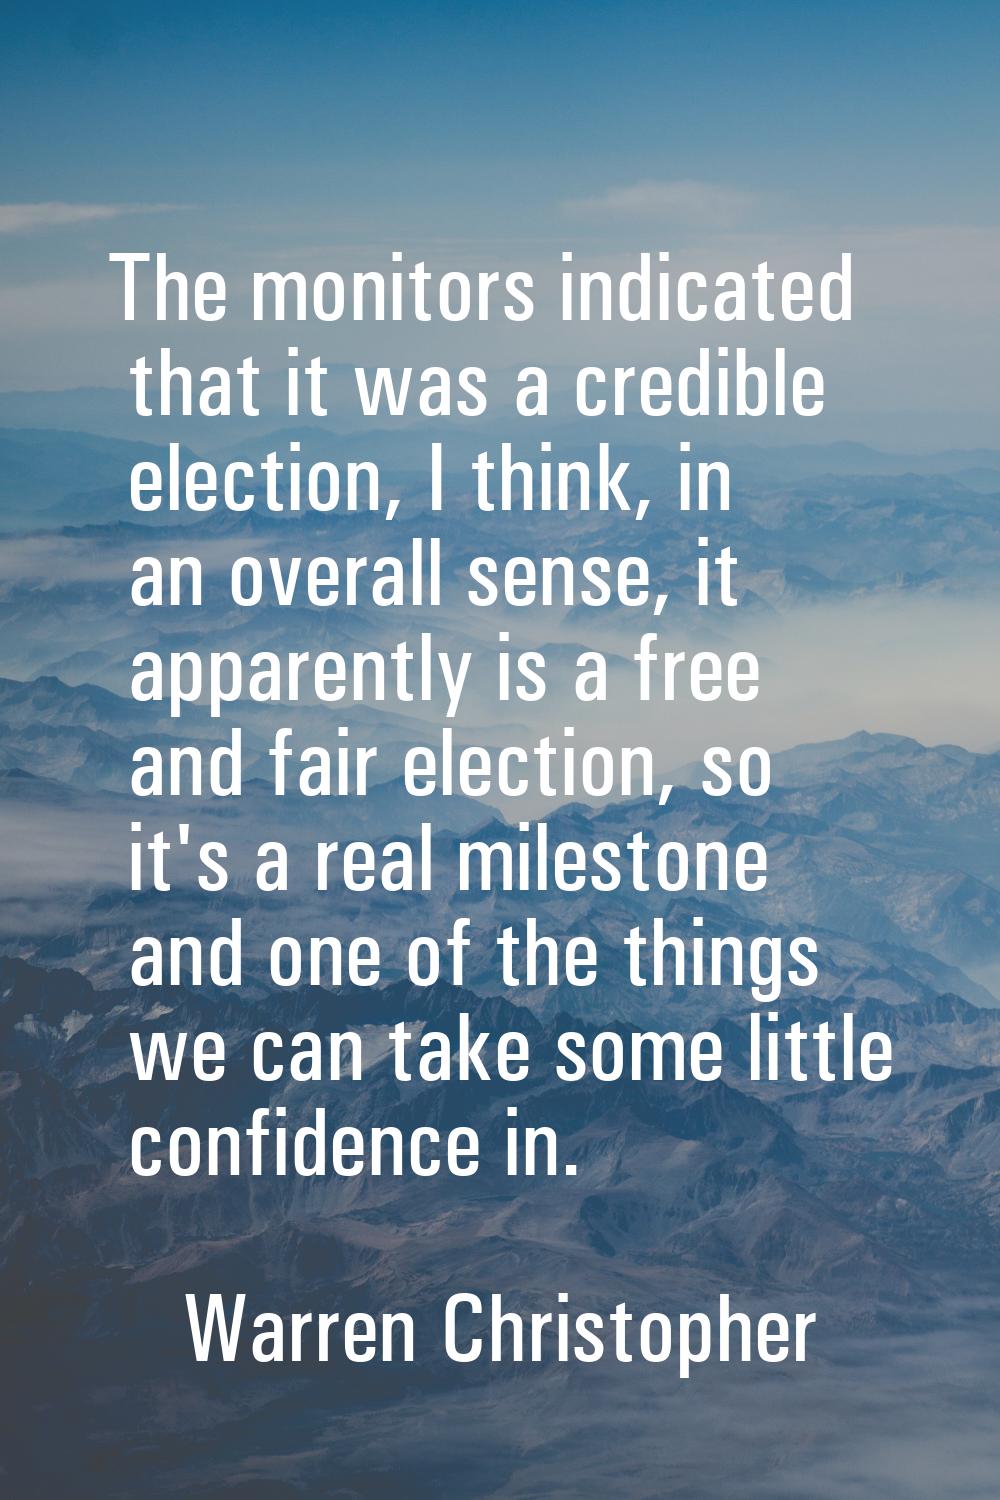 The monitors indicated that it was a credible election, I think, in an overall sense, it apparently